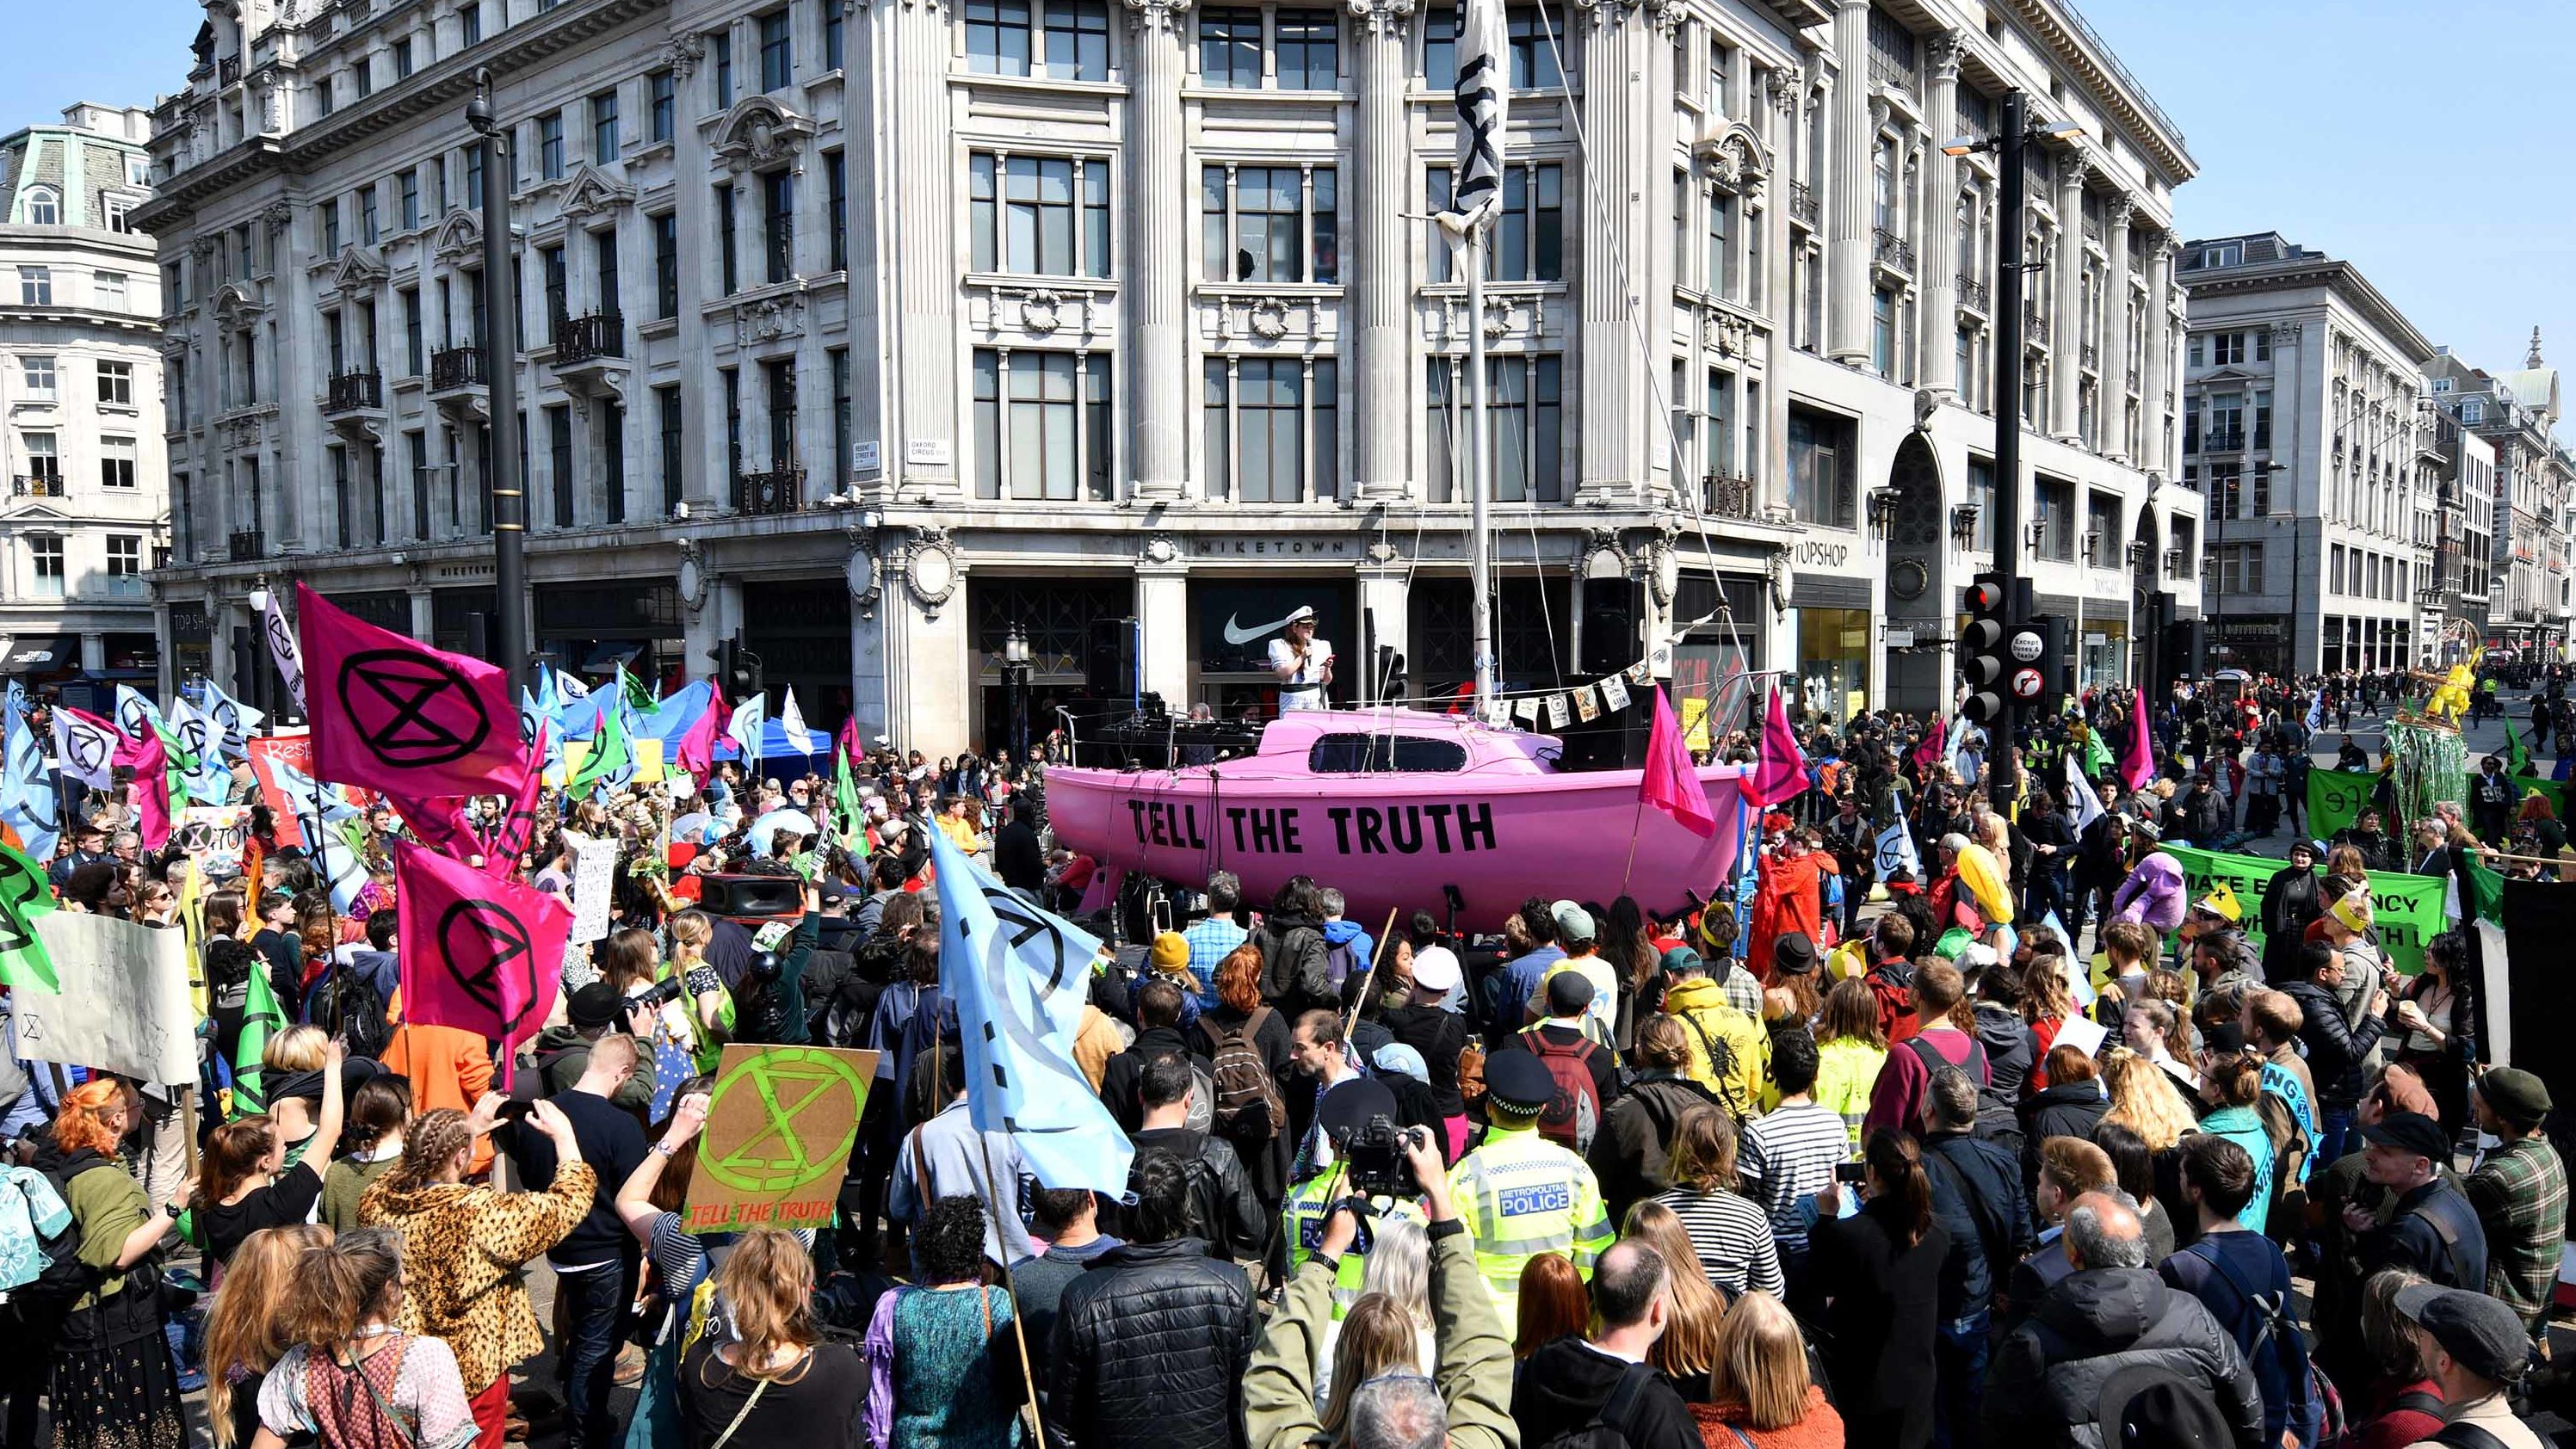 Oxford Circus was one of the main sites where protesters blocked traffic.